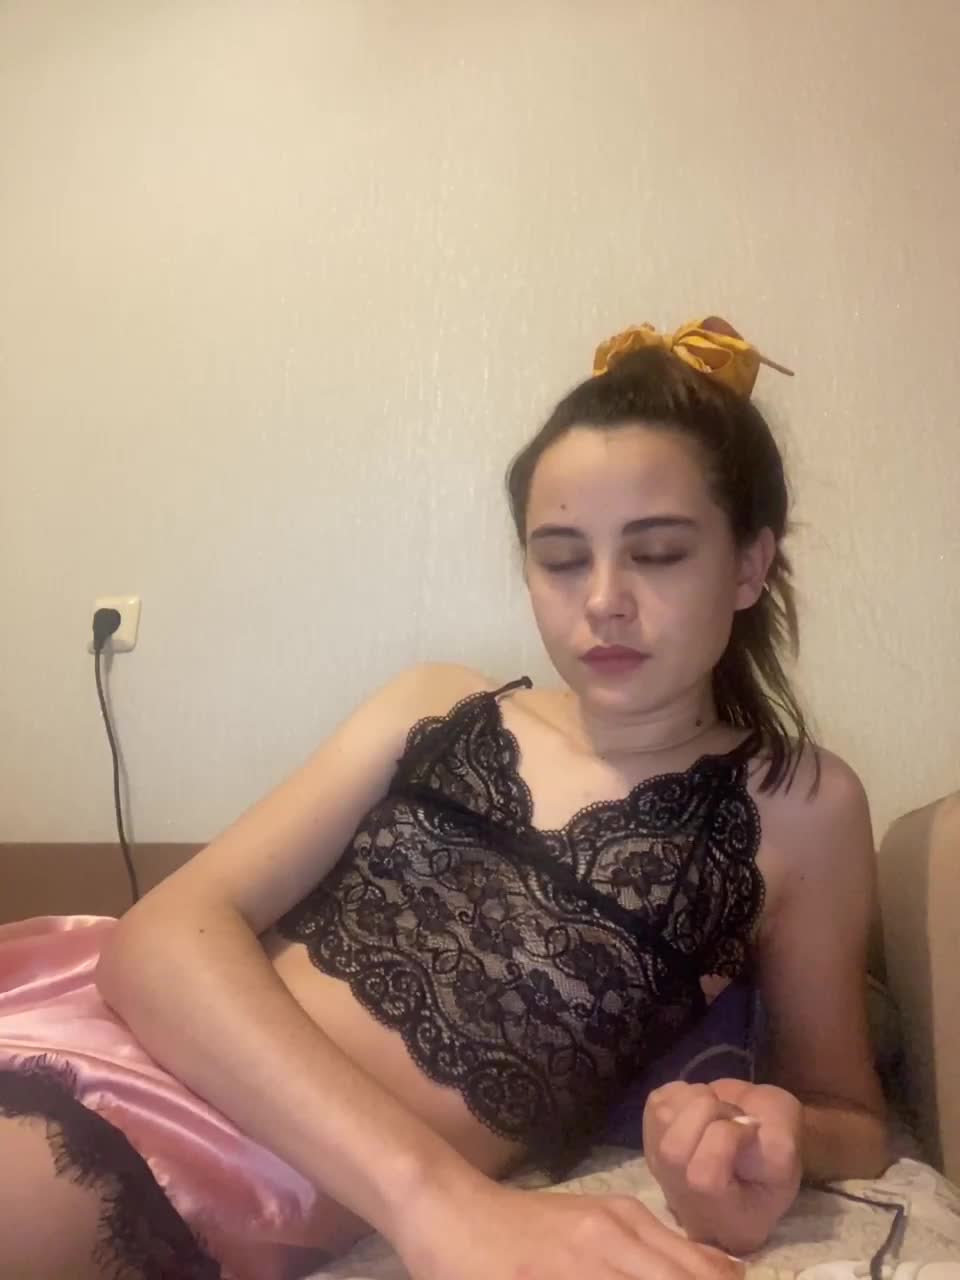 View or download file angelalina3 on 2023-01-08 from bongacams